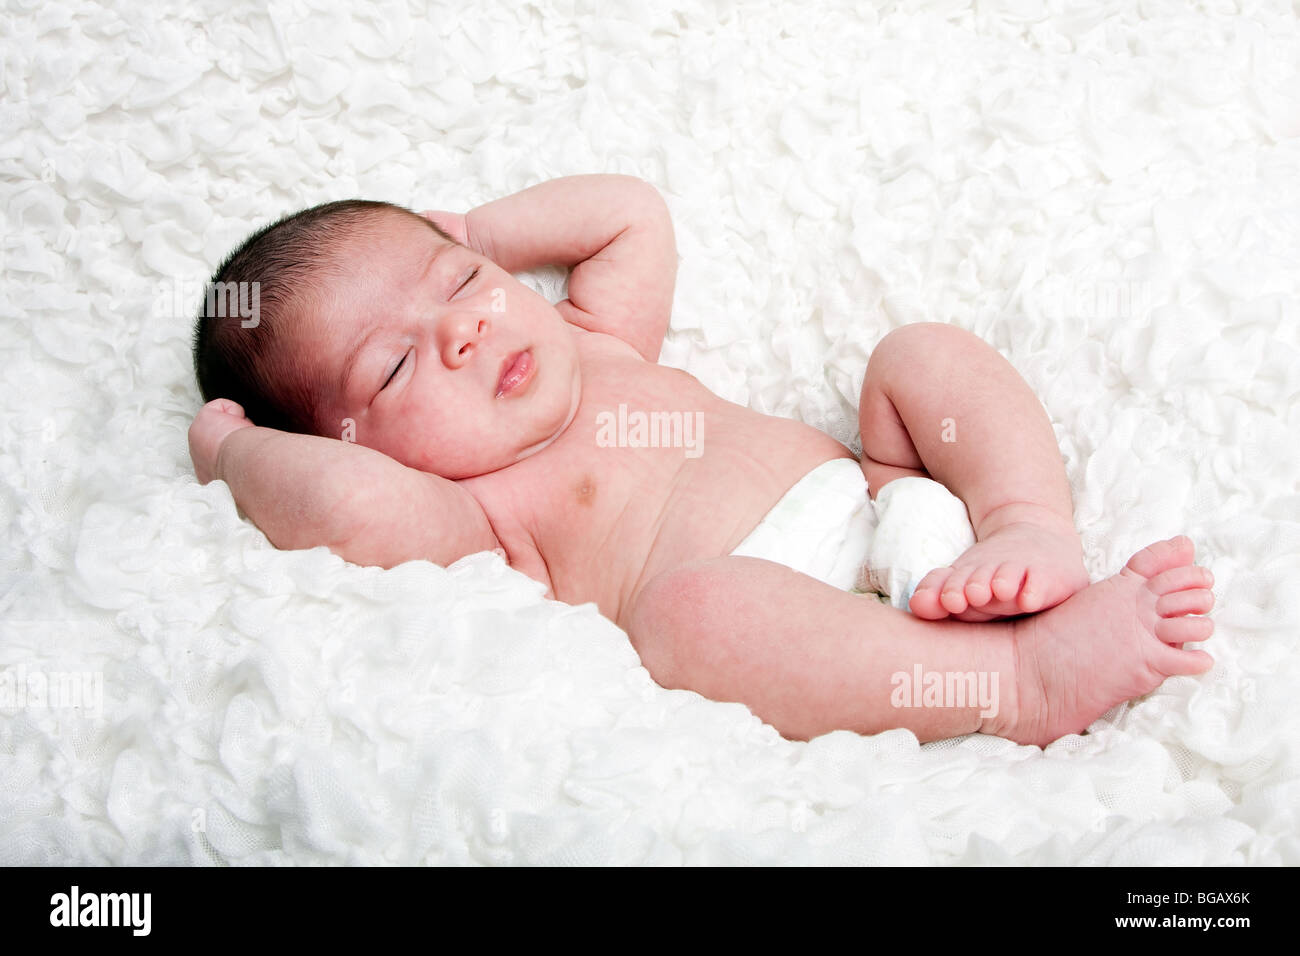 Cute Caucasian Hispanic infant baby asleep on soft white cotton cloud, wearing only a diaper. Stock Photo